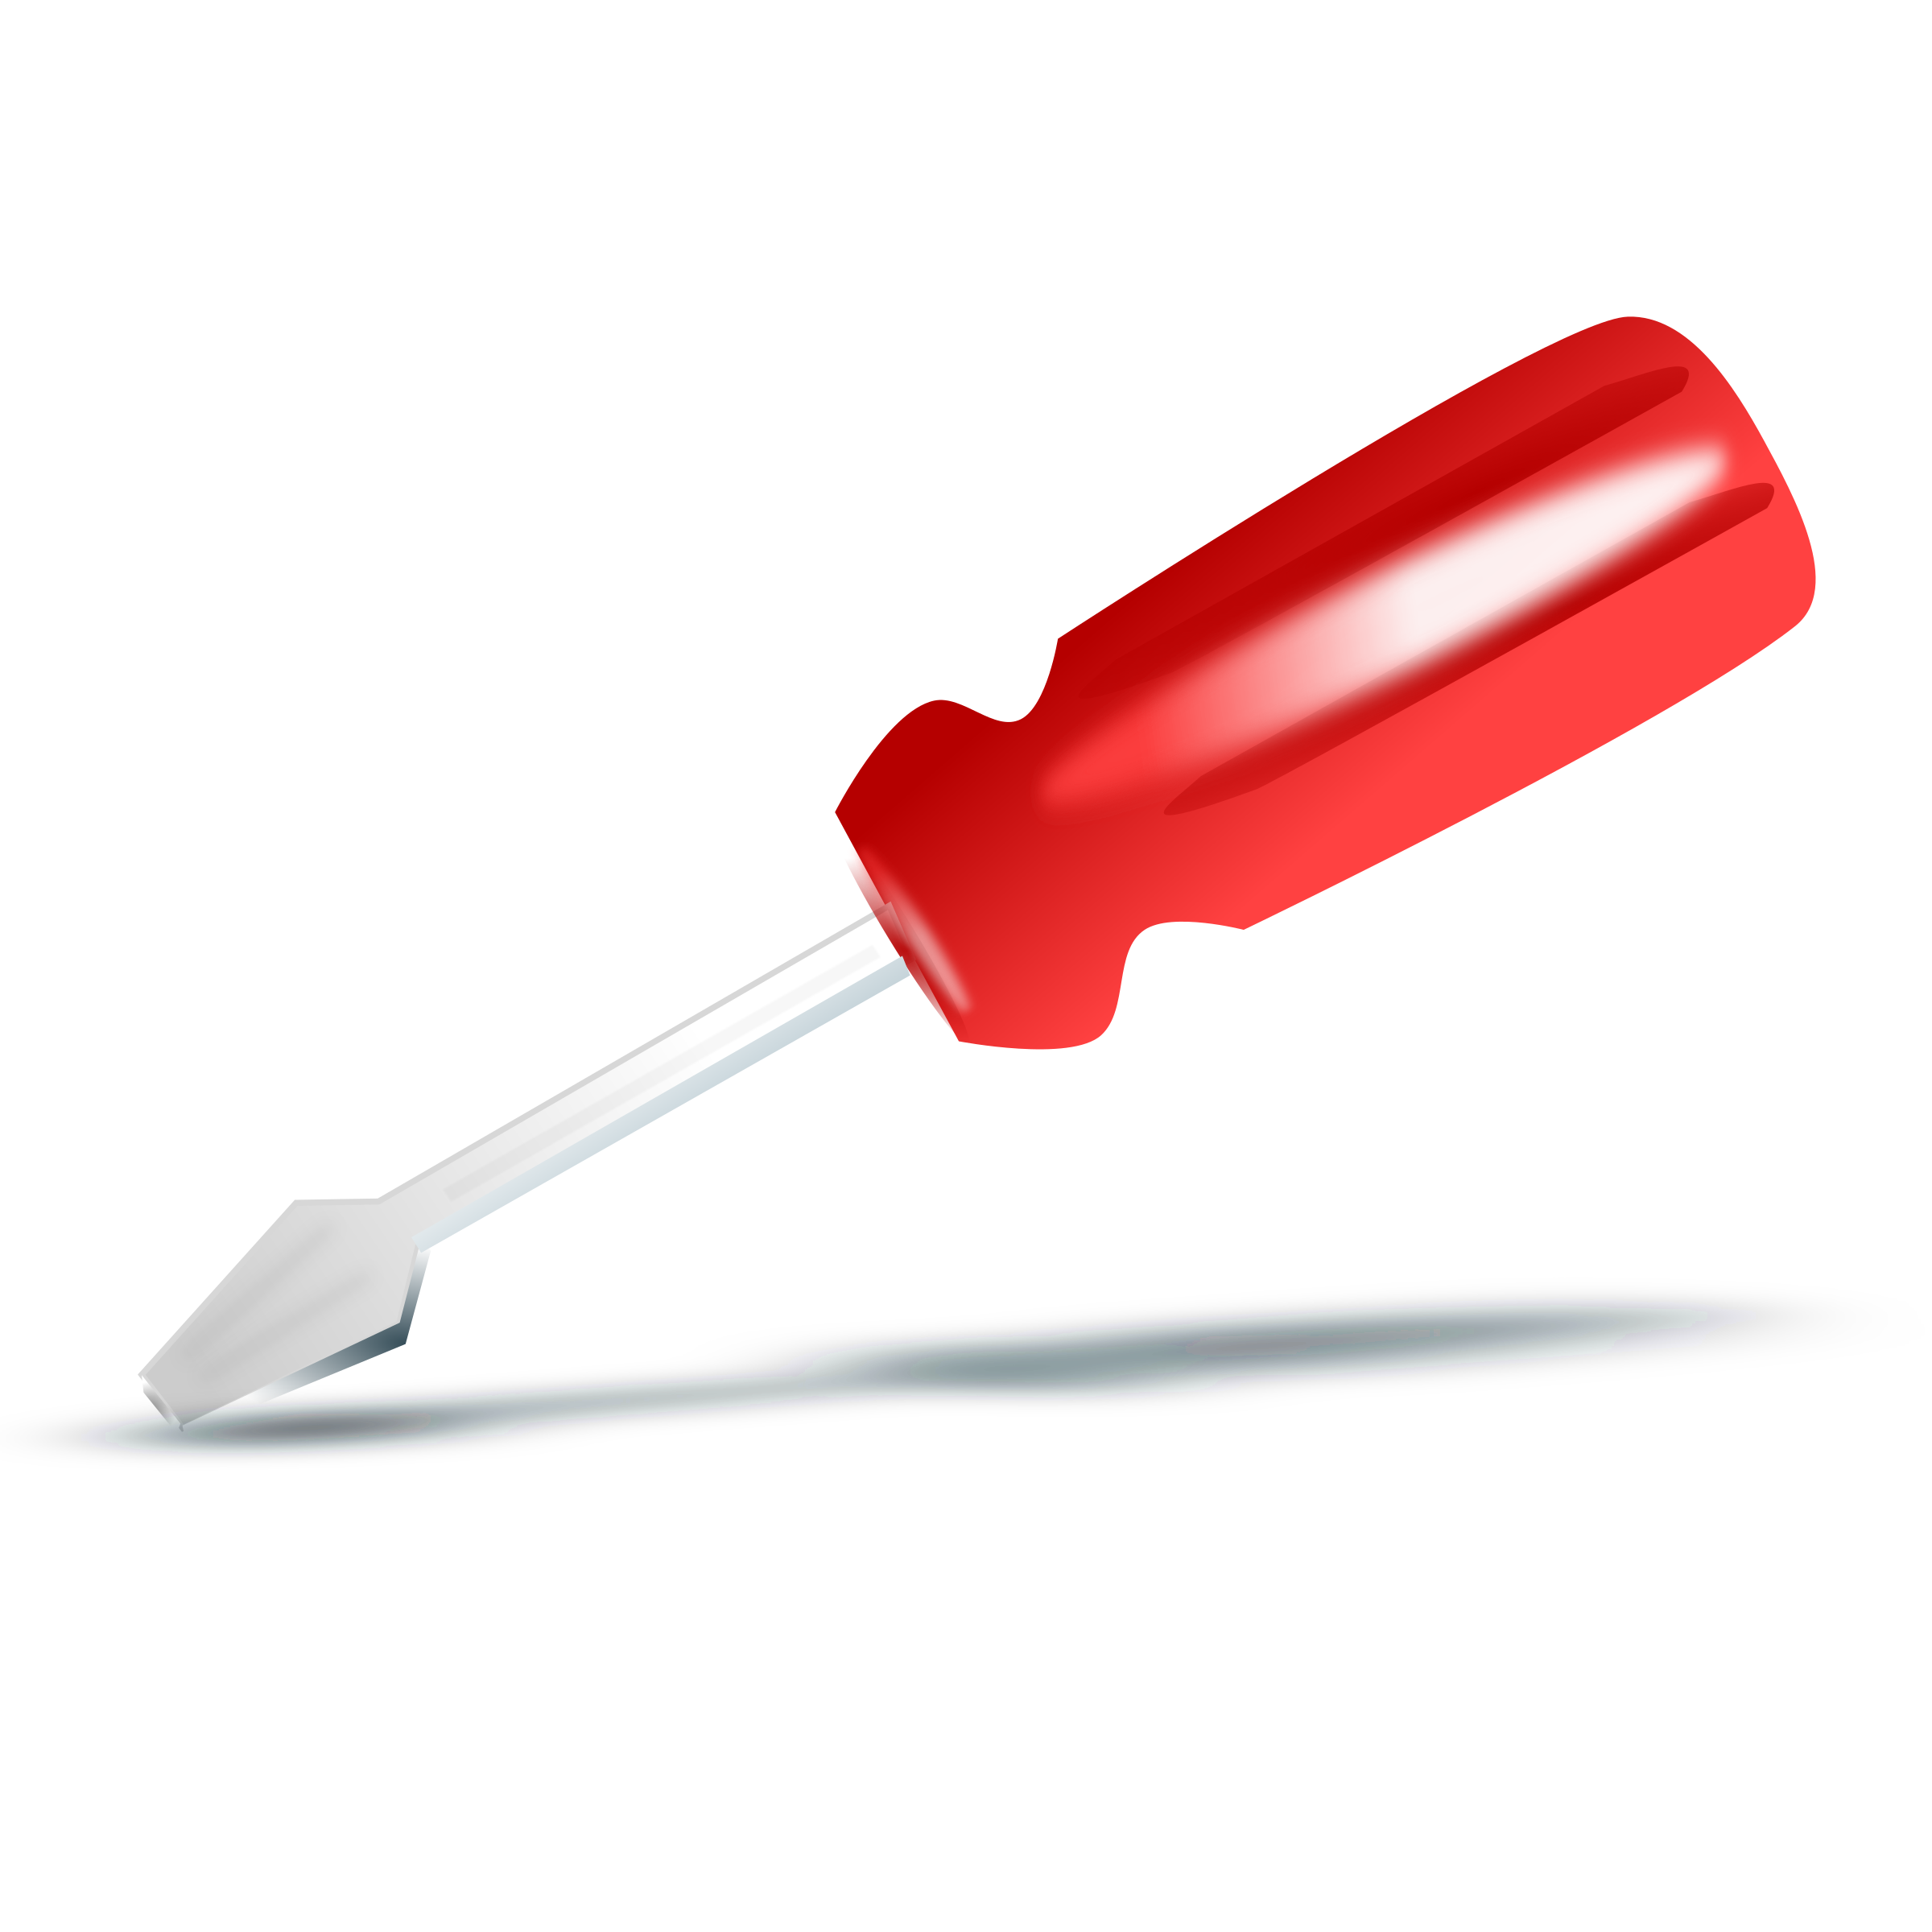 Icon big image png. Screwdriver clipart electric